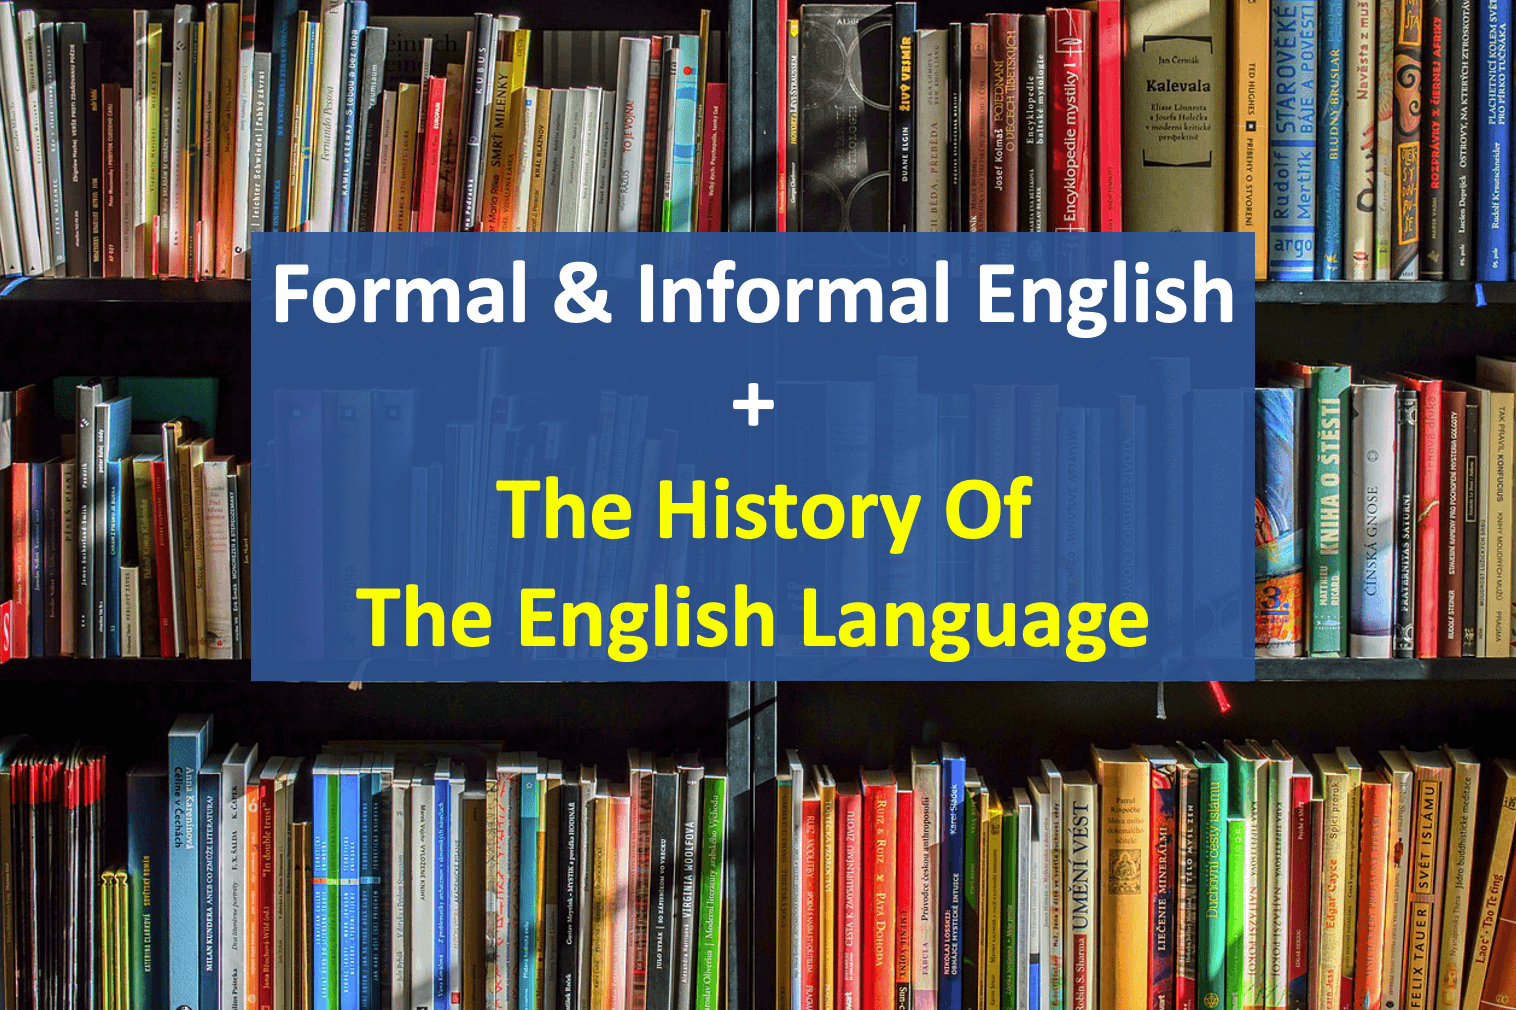 The history of the English language, plus formal and informal English